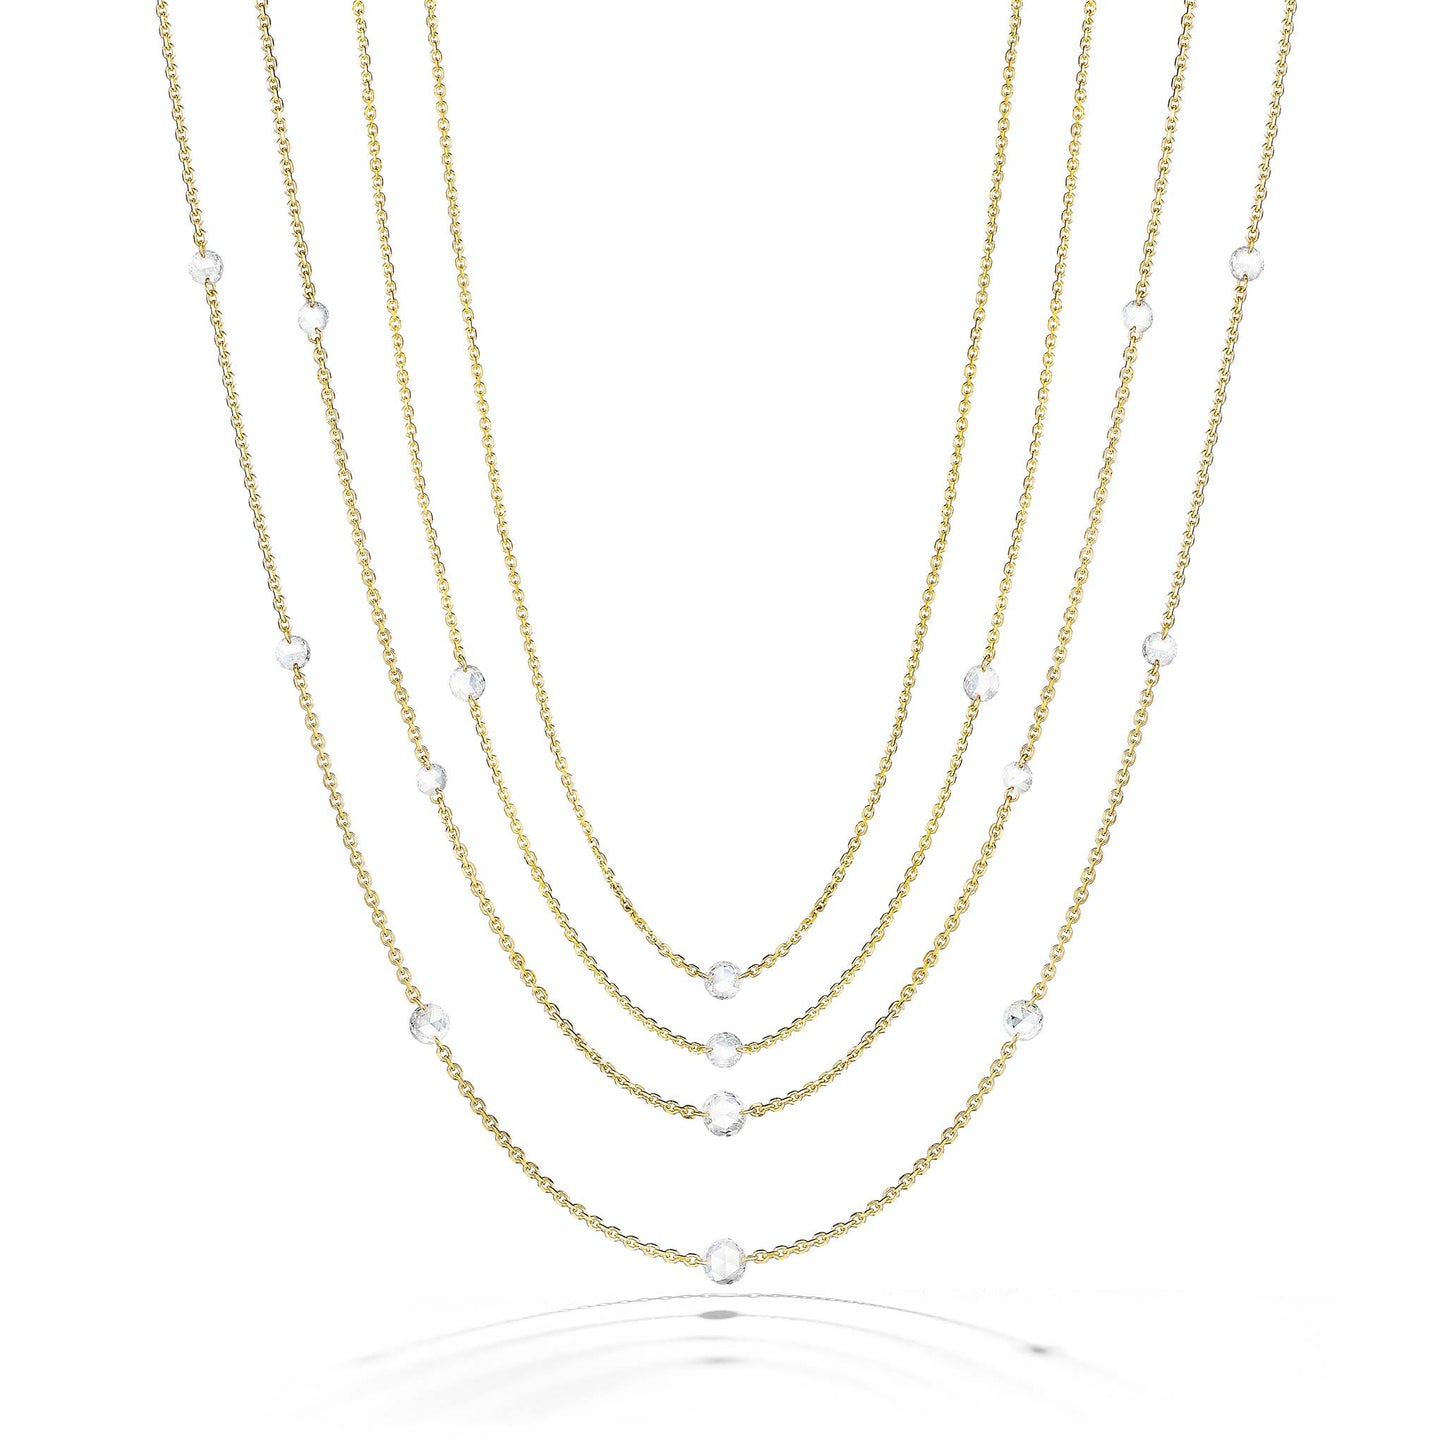 Mimi So Rosette Rose Cut Diamond Necklaces Group Layered